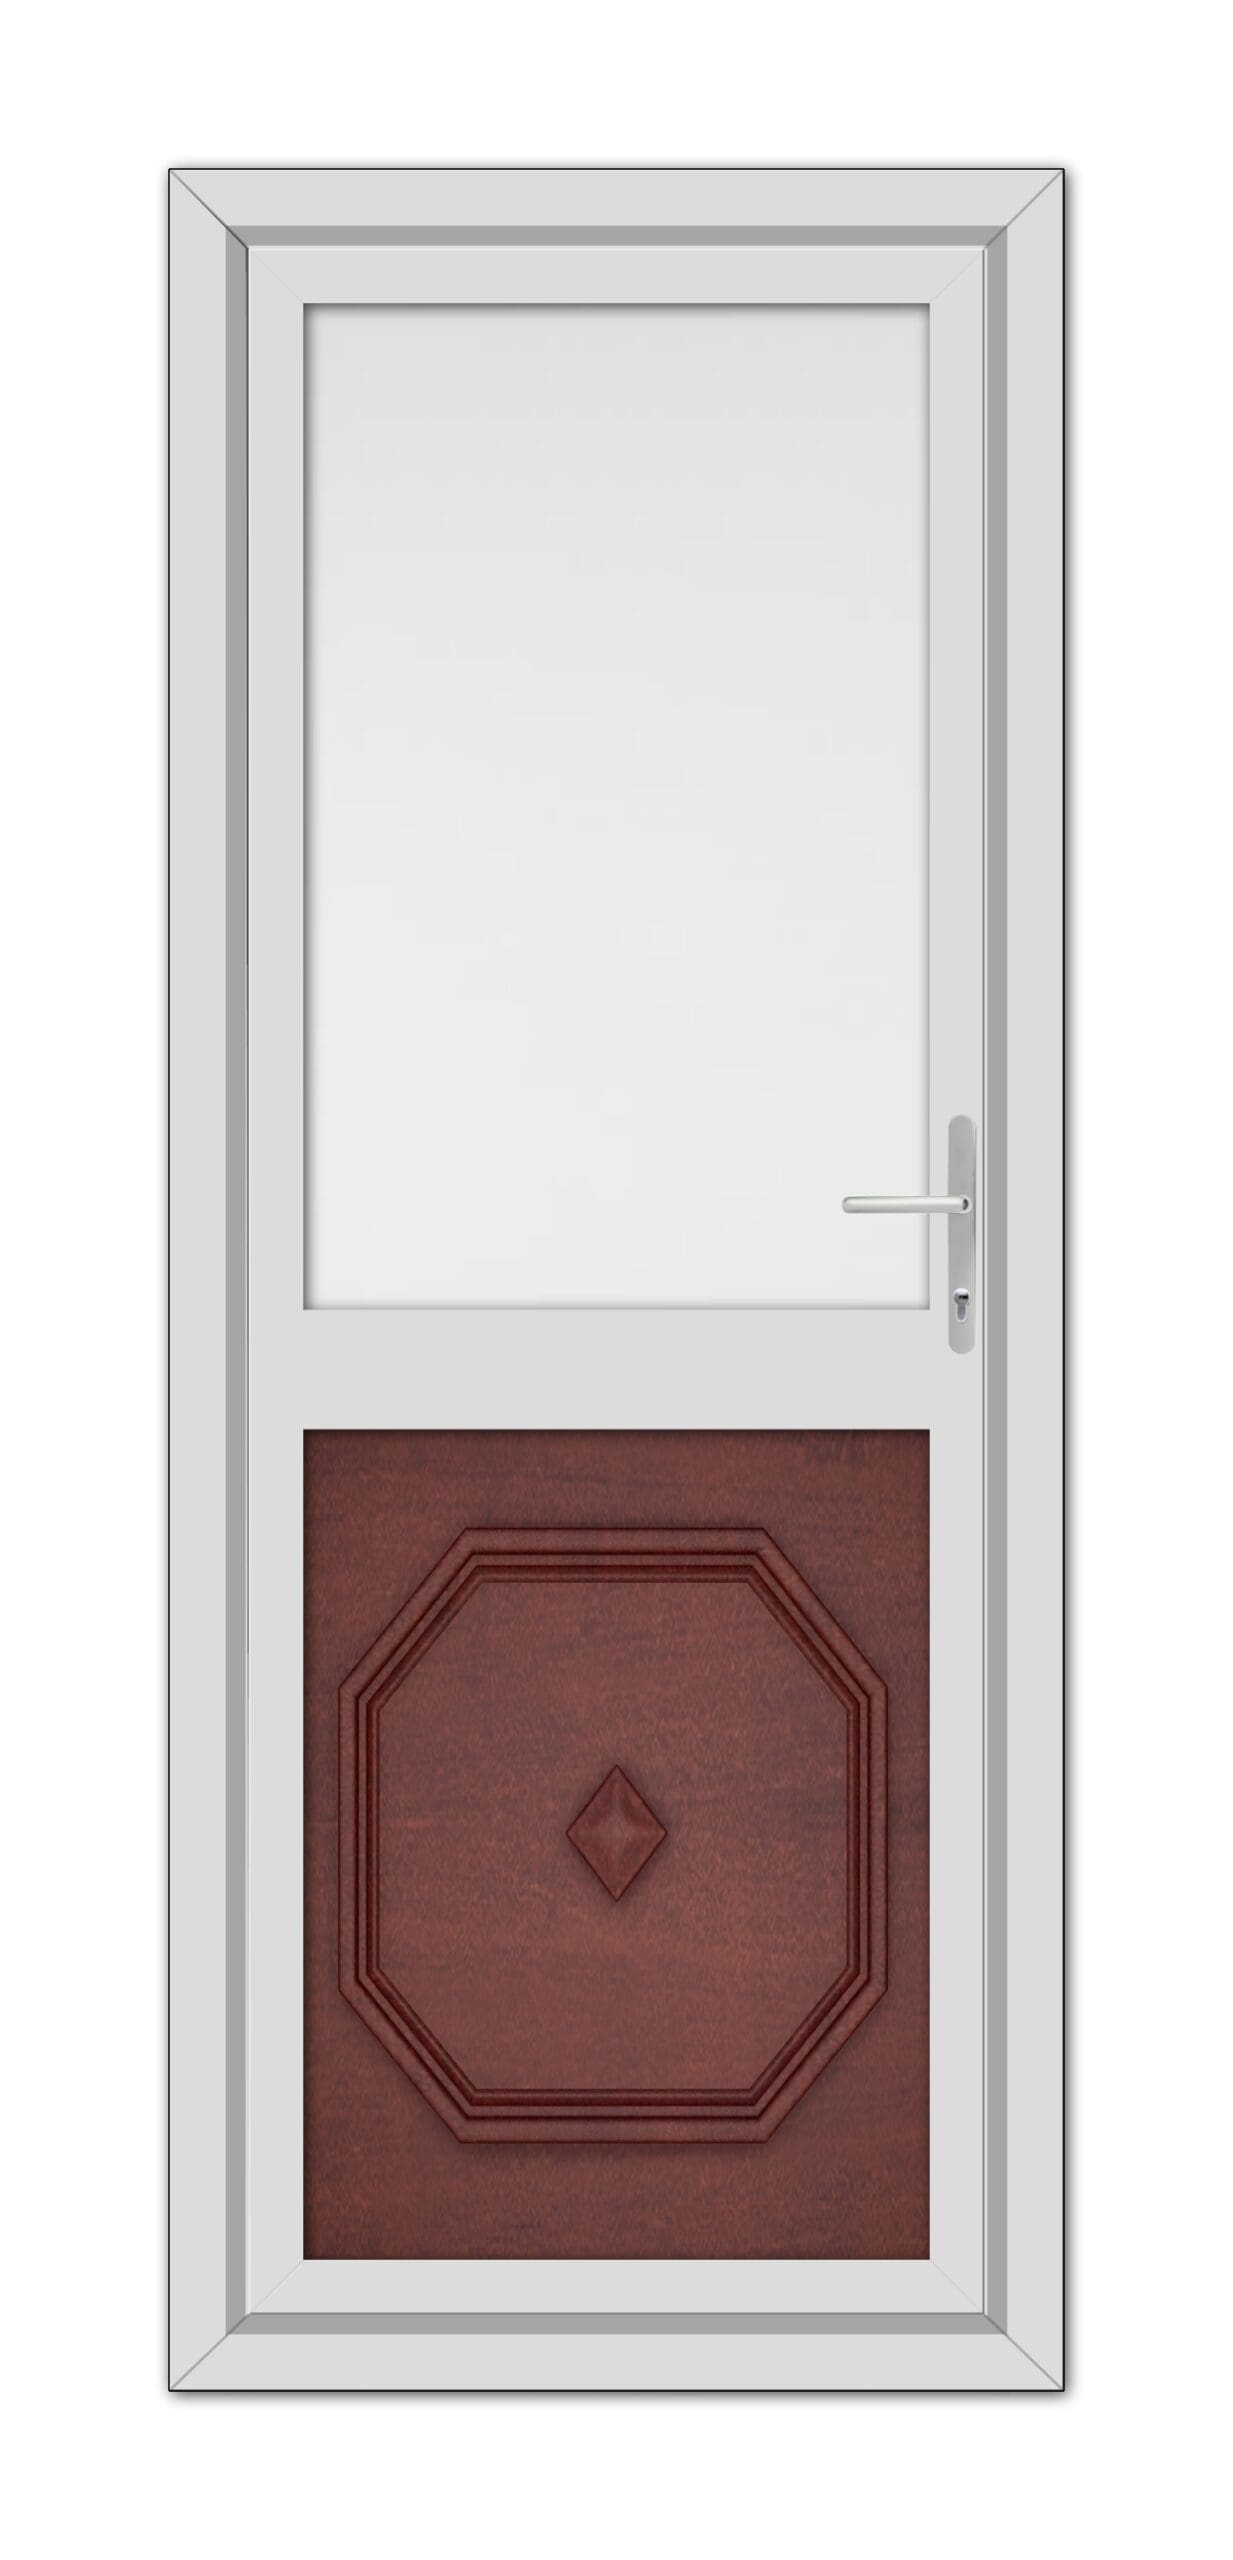 A Mahogan Westminster Half uPVC Back Door with a white frame, a clear glass pane at the top, a wooden lower panel with a diamond design, and a sleek handle on the right side.